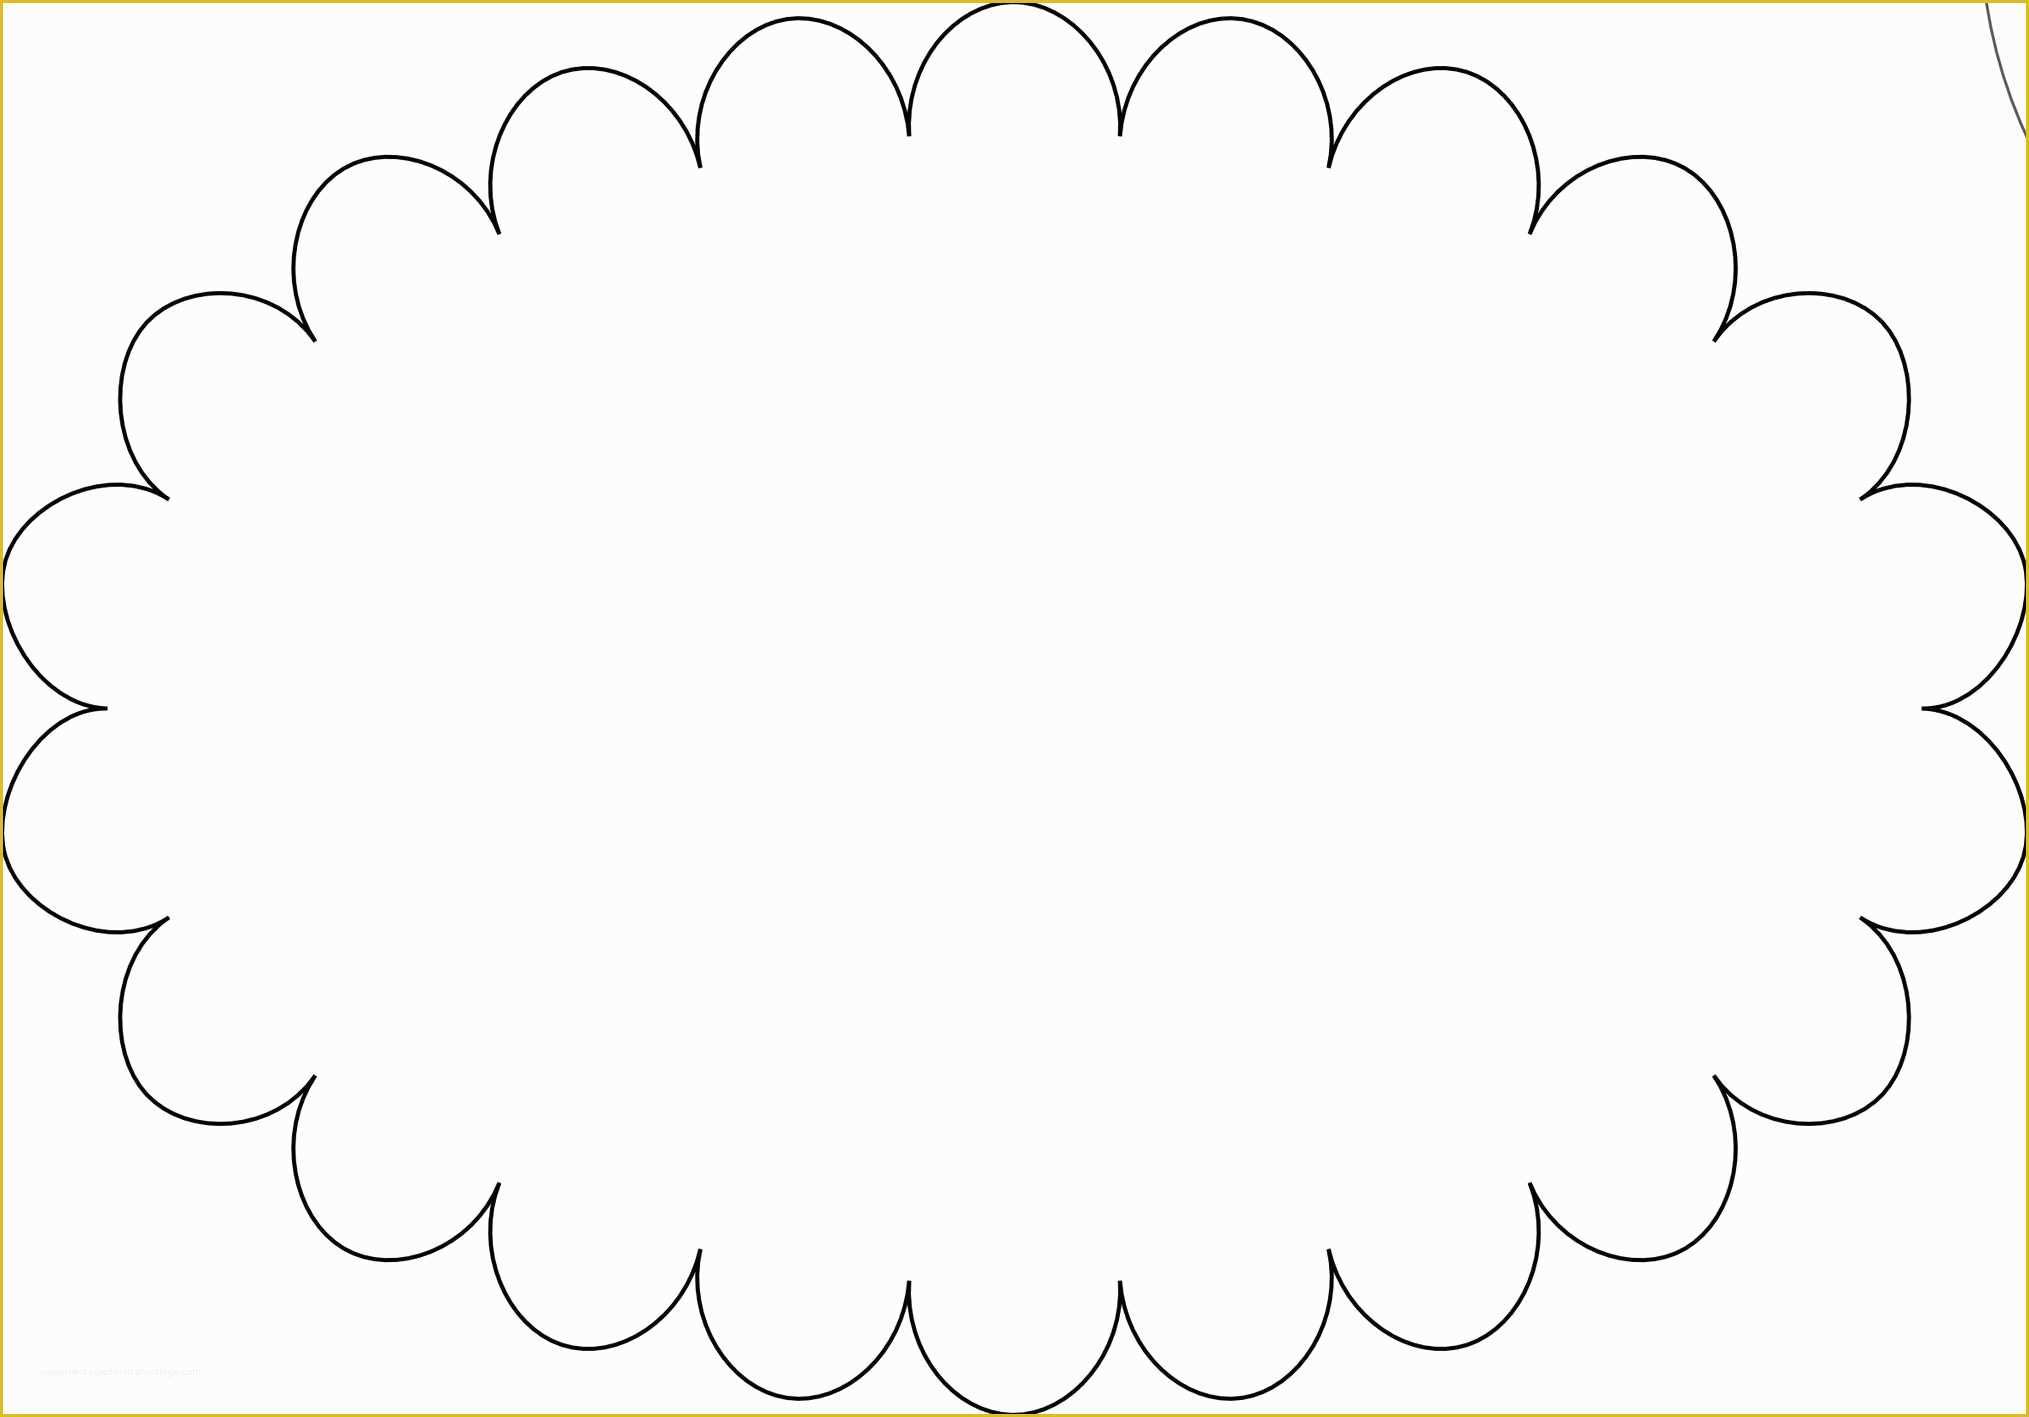 Free Penny Rug Templates Of Templates and Printables On Pinterest